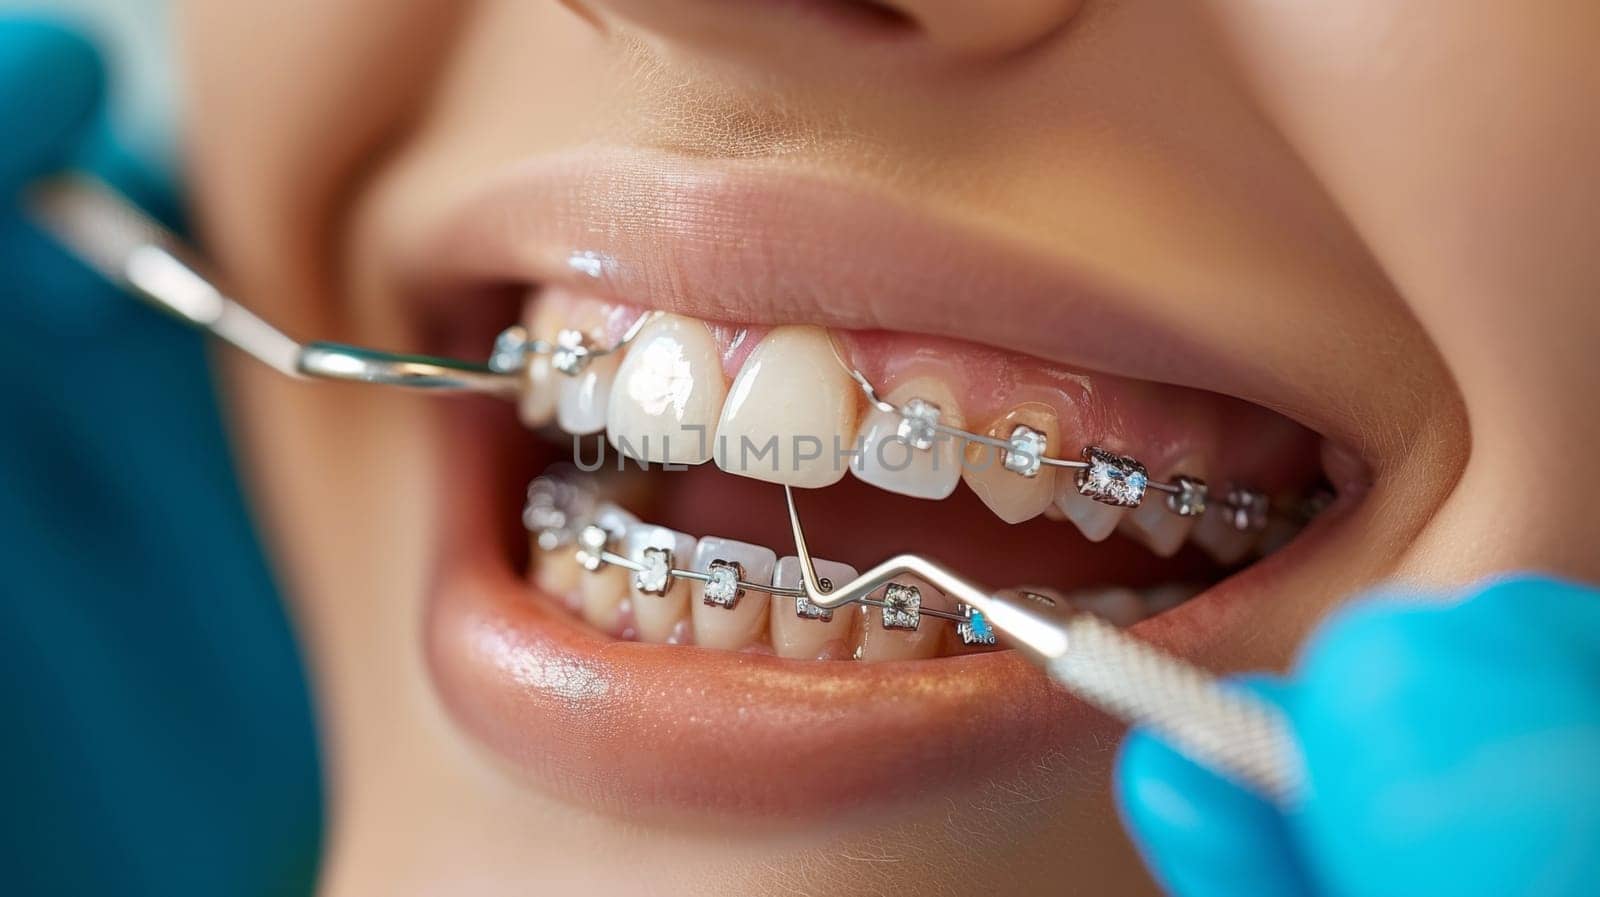 A close up of a person with braces getting their teeth cleaned